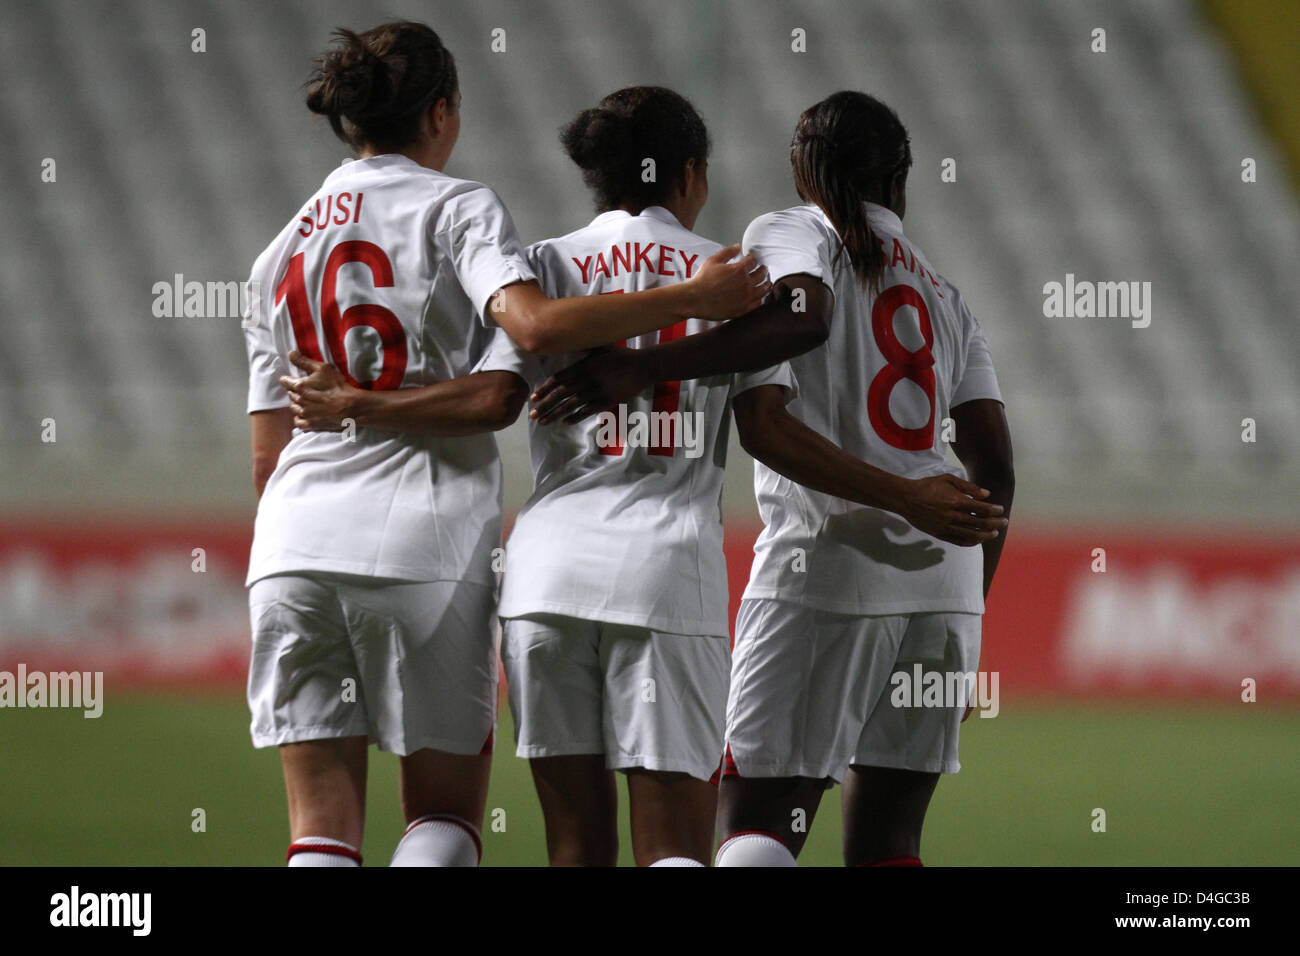 CYPRUS,NICOSIA-MARCH 9:Rachel Yankey of England celebrate a goal   during the game between England and Canada for the Final of Cyprus Football Womens Cup in Nicosia on March 13,2013 Stock Photo